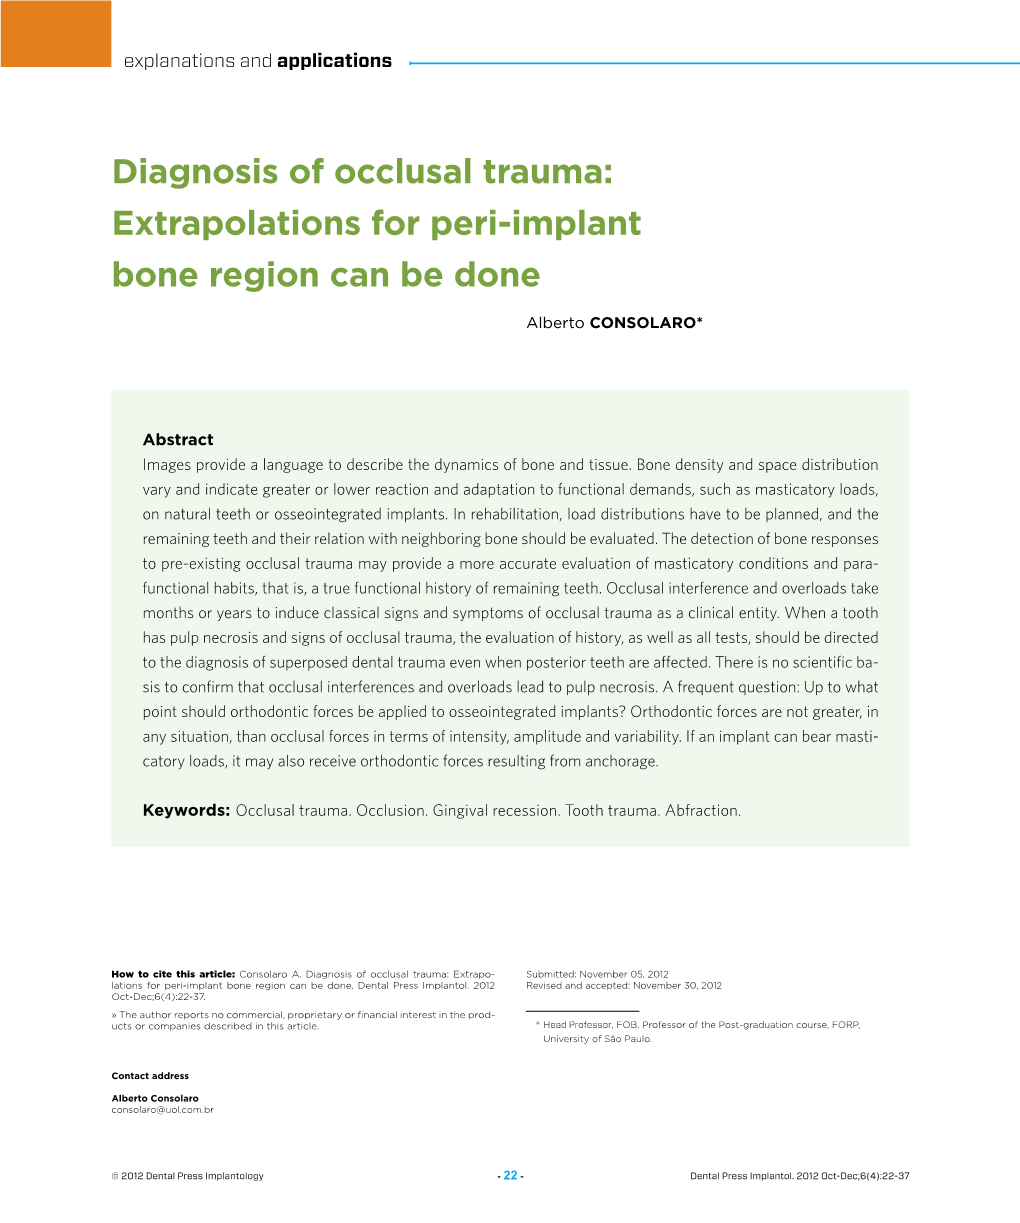 Diagnosis of Occlusal Trauma: Extrapolations for Peri-Implant Bone Region Can Be Done